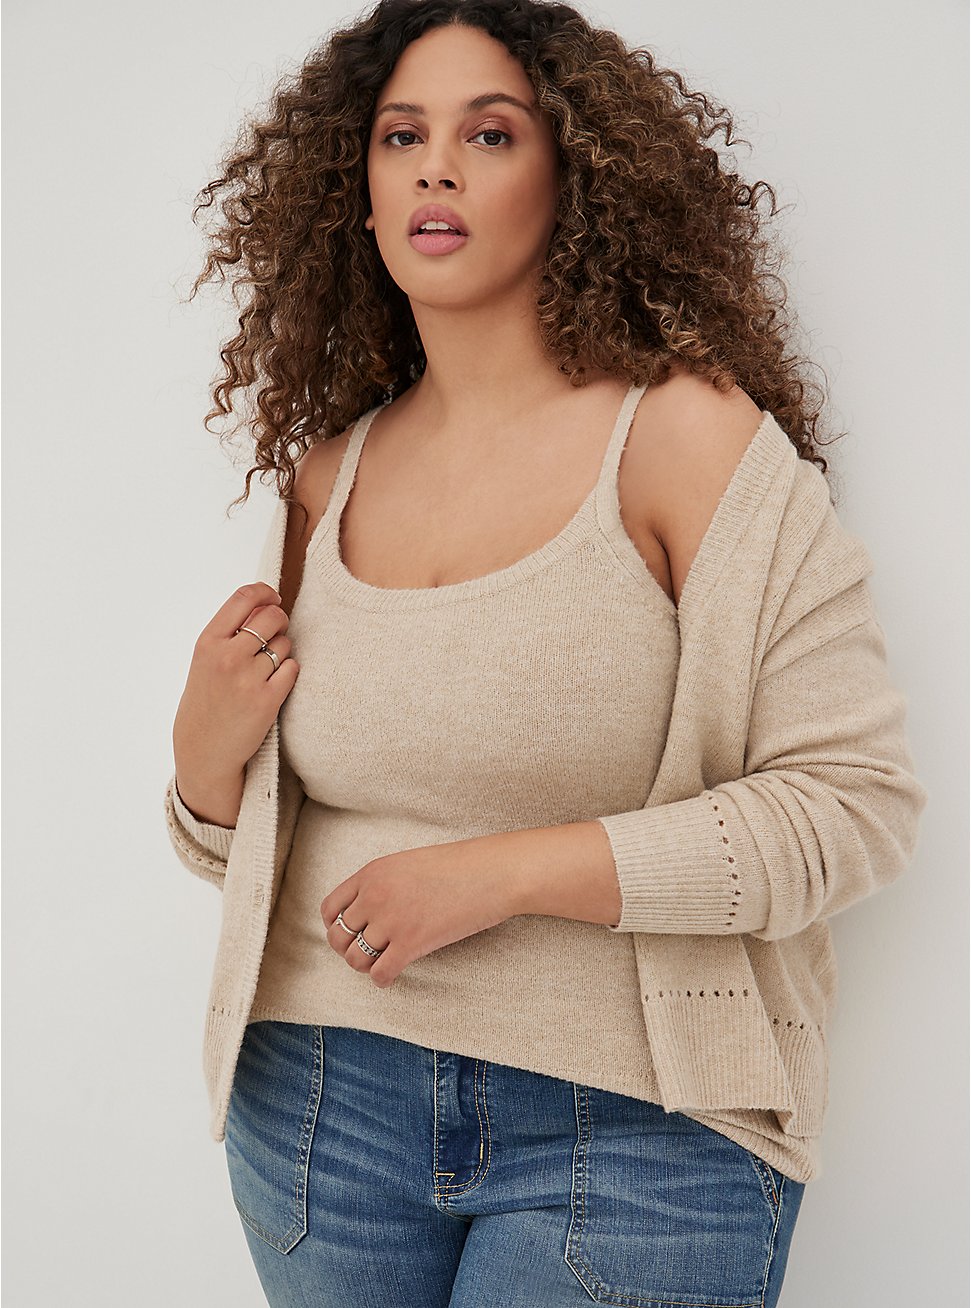 Sweater Cami - Taupe, LIGHT TAUPE, hi-res